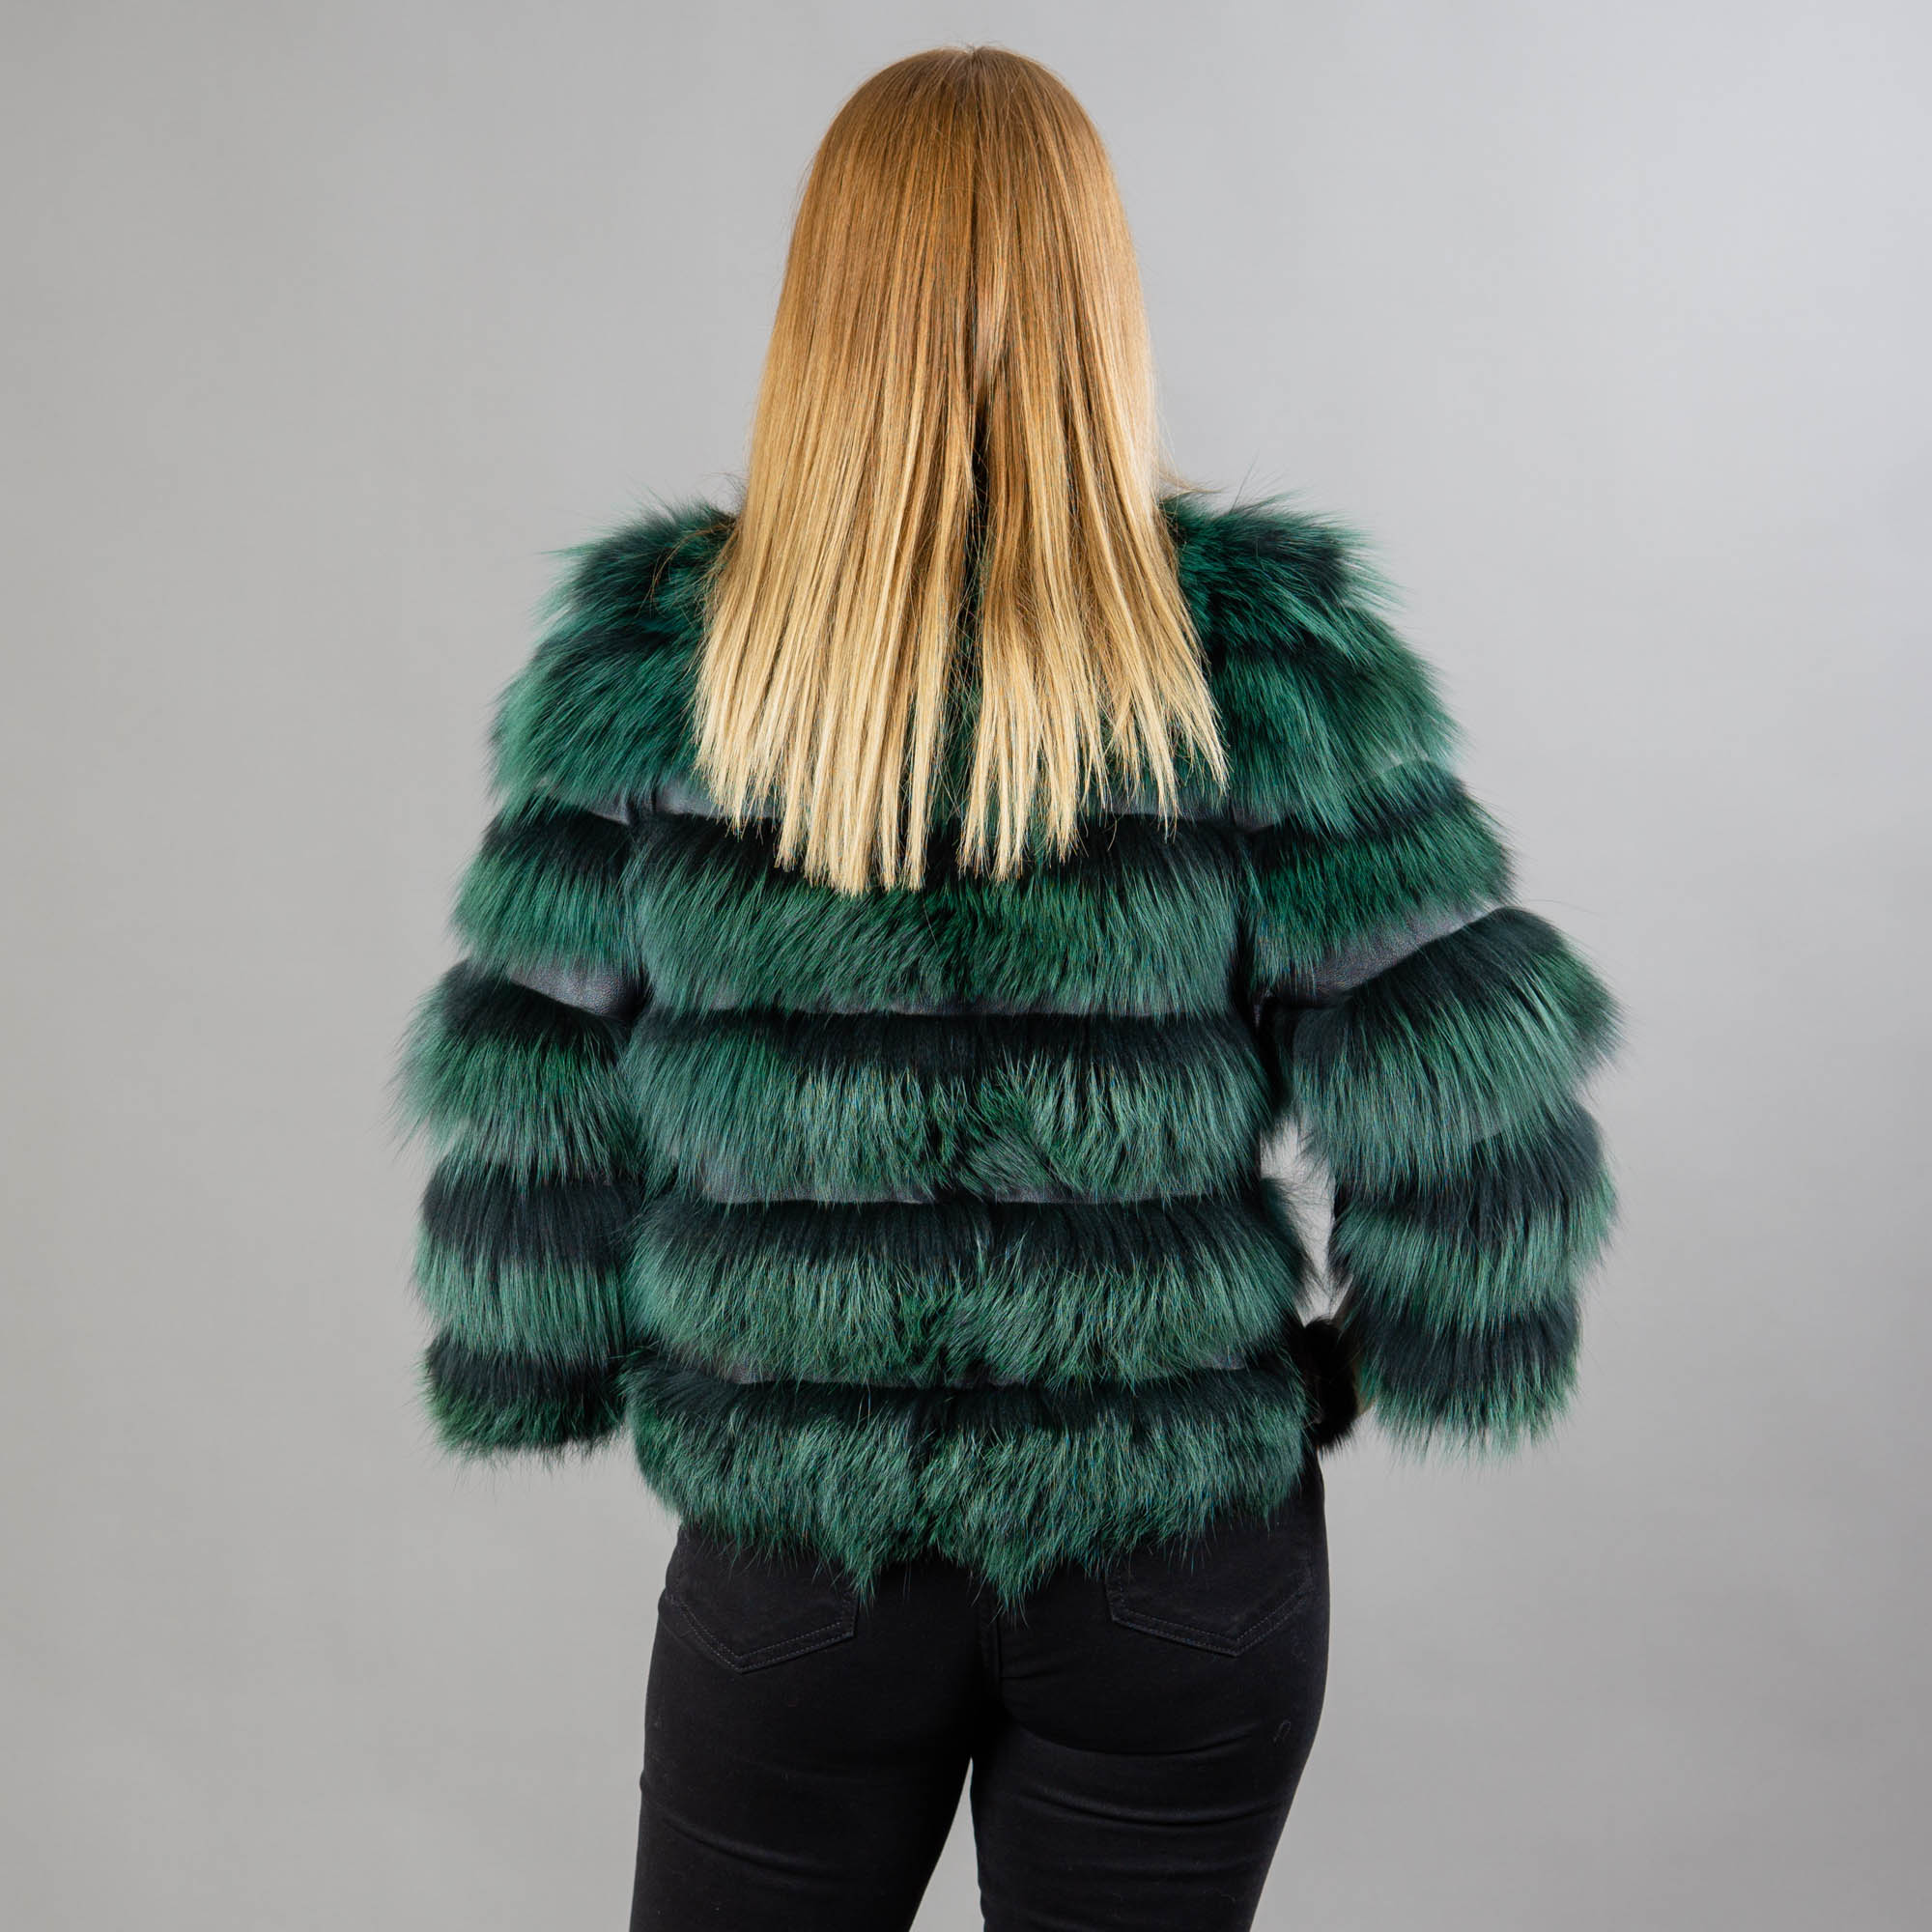 green fox fur jacket with leather details